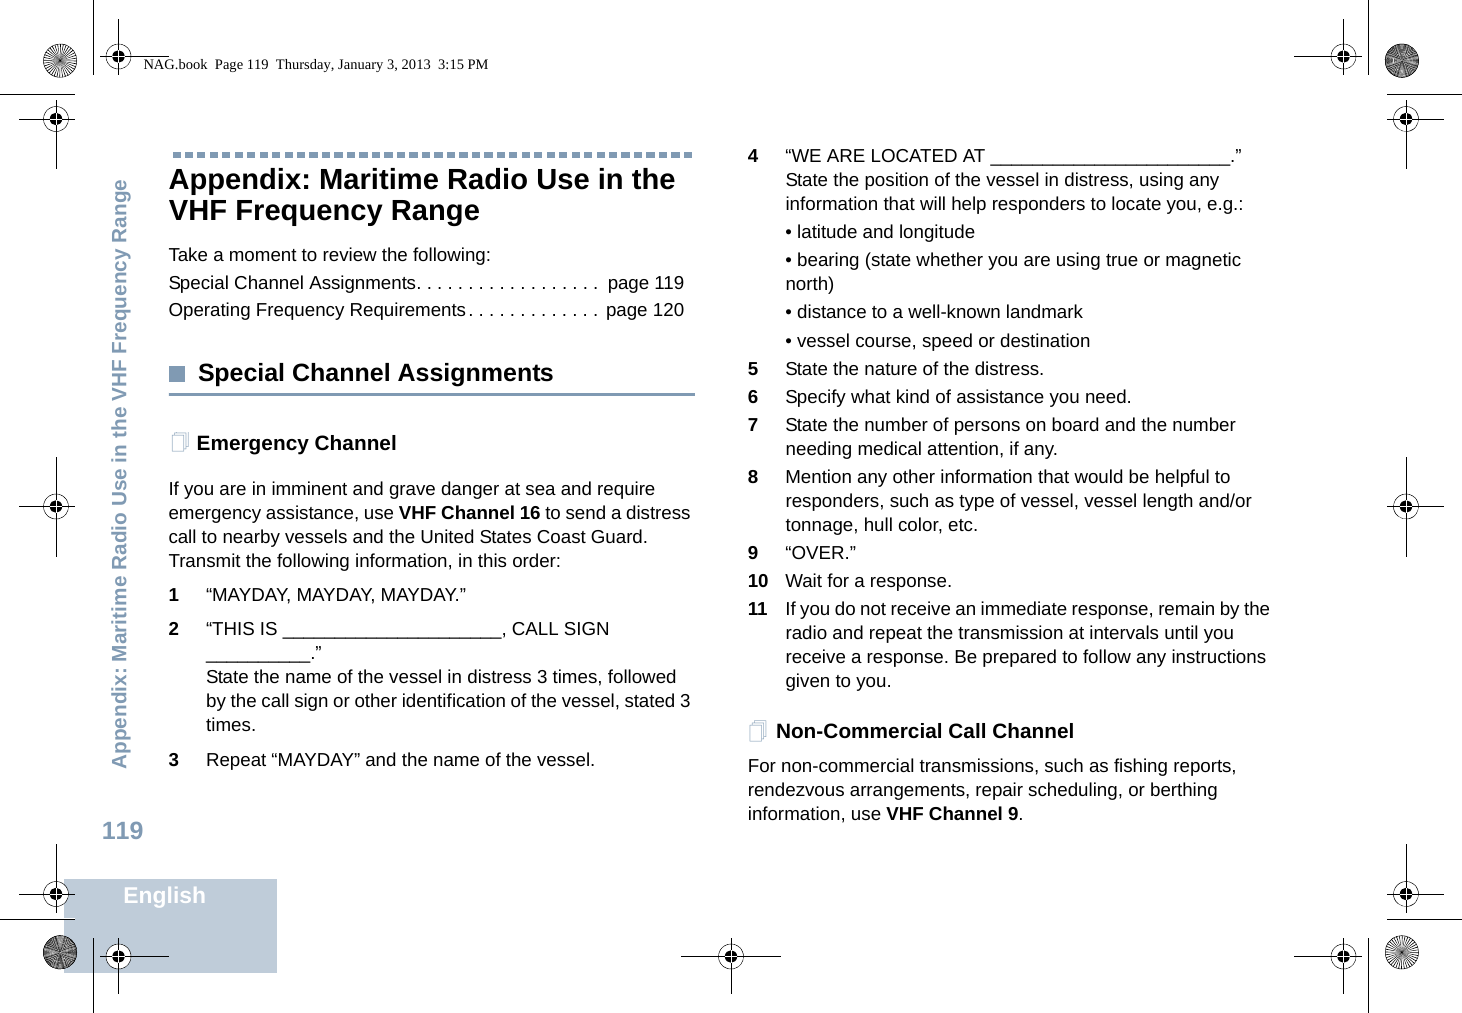 Appendix: Maritime Radio Use in the VHF Frequency RangeEnglish119Appendix: Maritime Radio Use in the VHF Frequency RangeTake a moment to review the following:Special Channel Assignments. . . . . . . . . . . . . . . . . .  page 119Operating Frequency Requirements. . . . . . . . . . . . .  page 120Special Channel AssignmentsEmergency ChannelIf you are in imminent and grave danger at sea and require emergency assistance, use VHF Channel 16 to send a distress call to nearby vessels and the United States Coast Guard. Transmit the following information, in this order:1“MAYDAY, MAYDAY, MAYDAY.”2“THIS IS _____________________, CALL SIGN __________.”State the name of the vessel in distress 3 times, followed by the call sign or other identification of the vessel, stated 3 times.3Repeat “MAYDAY” and the name of the vessel.4“WE ARE LOCATED AT _______________________.” State the position of the vessel in distress, using any information that will help responders to locate you, e.g.:• latitude and longitude• bearing (state whether you are using true or magnetic north)• distance to a well-known landmark• vessel course, speed or destination5State the nature of the distress.6Specify what kind of assistance you need.7State the number of persons on board and the number needing medical attention, if any.8Mention any other information that would be helpful to responders, such as type of vessel, vessel length and/or tonnage, hull color, etc.9“OVER.”10 Wait for a response.11 If you do not receive an immediate response, remain by the radio and repeat the transmission at intervals until you receive a response. Be prepared to follow any instructions given to you.Non-Commercial Call ChannelFor non-commercial transmissions, such as fishing reports, rendezvous arrangements, repair scheduling, or berthing information, use VHF Channel 9.NAG.book  Page 119  Thursday, January 3, 2013  3:15 PM